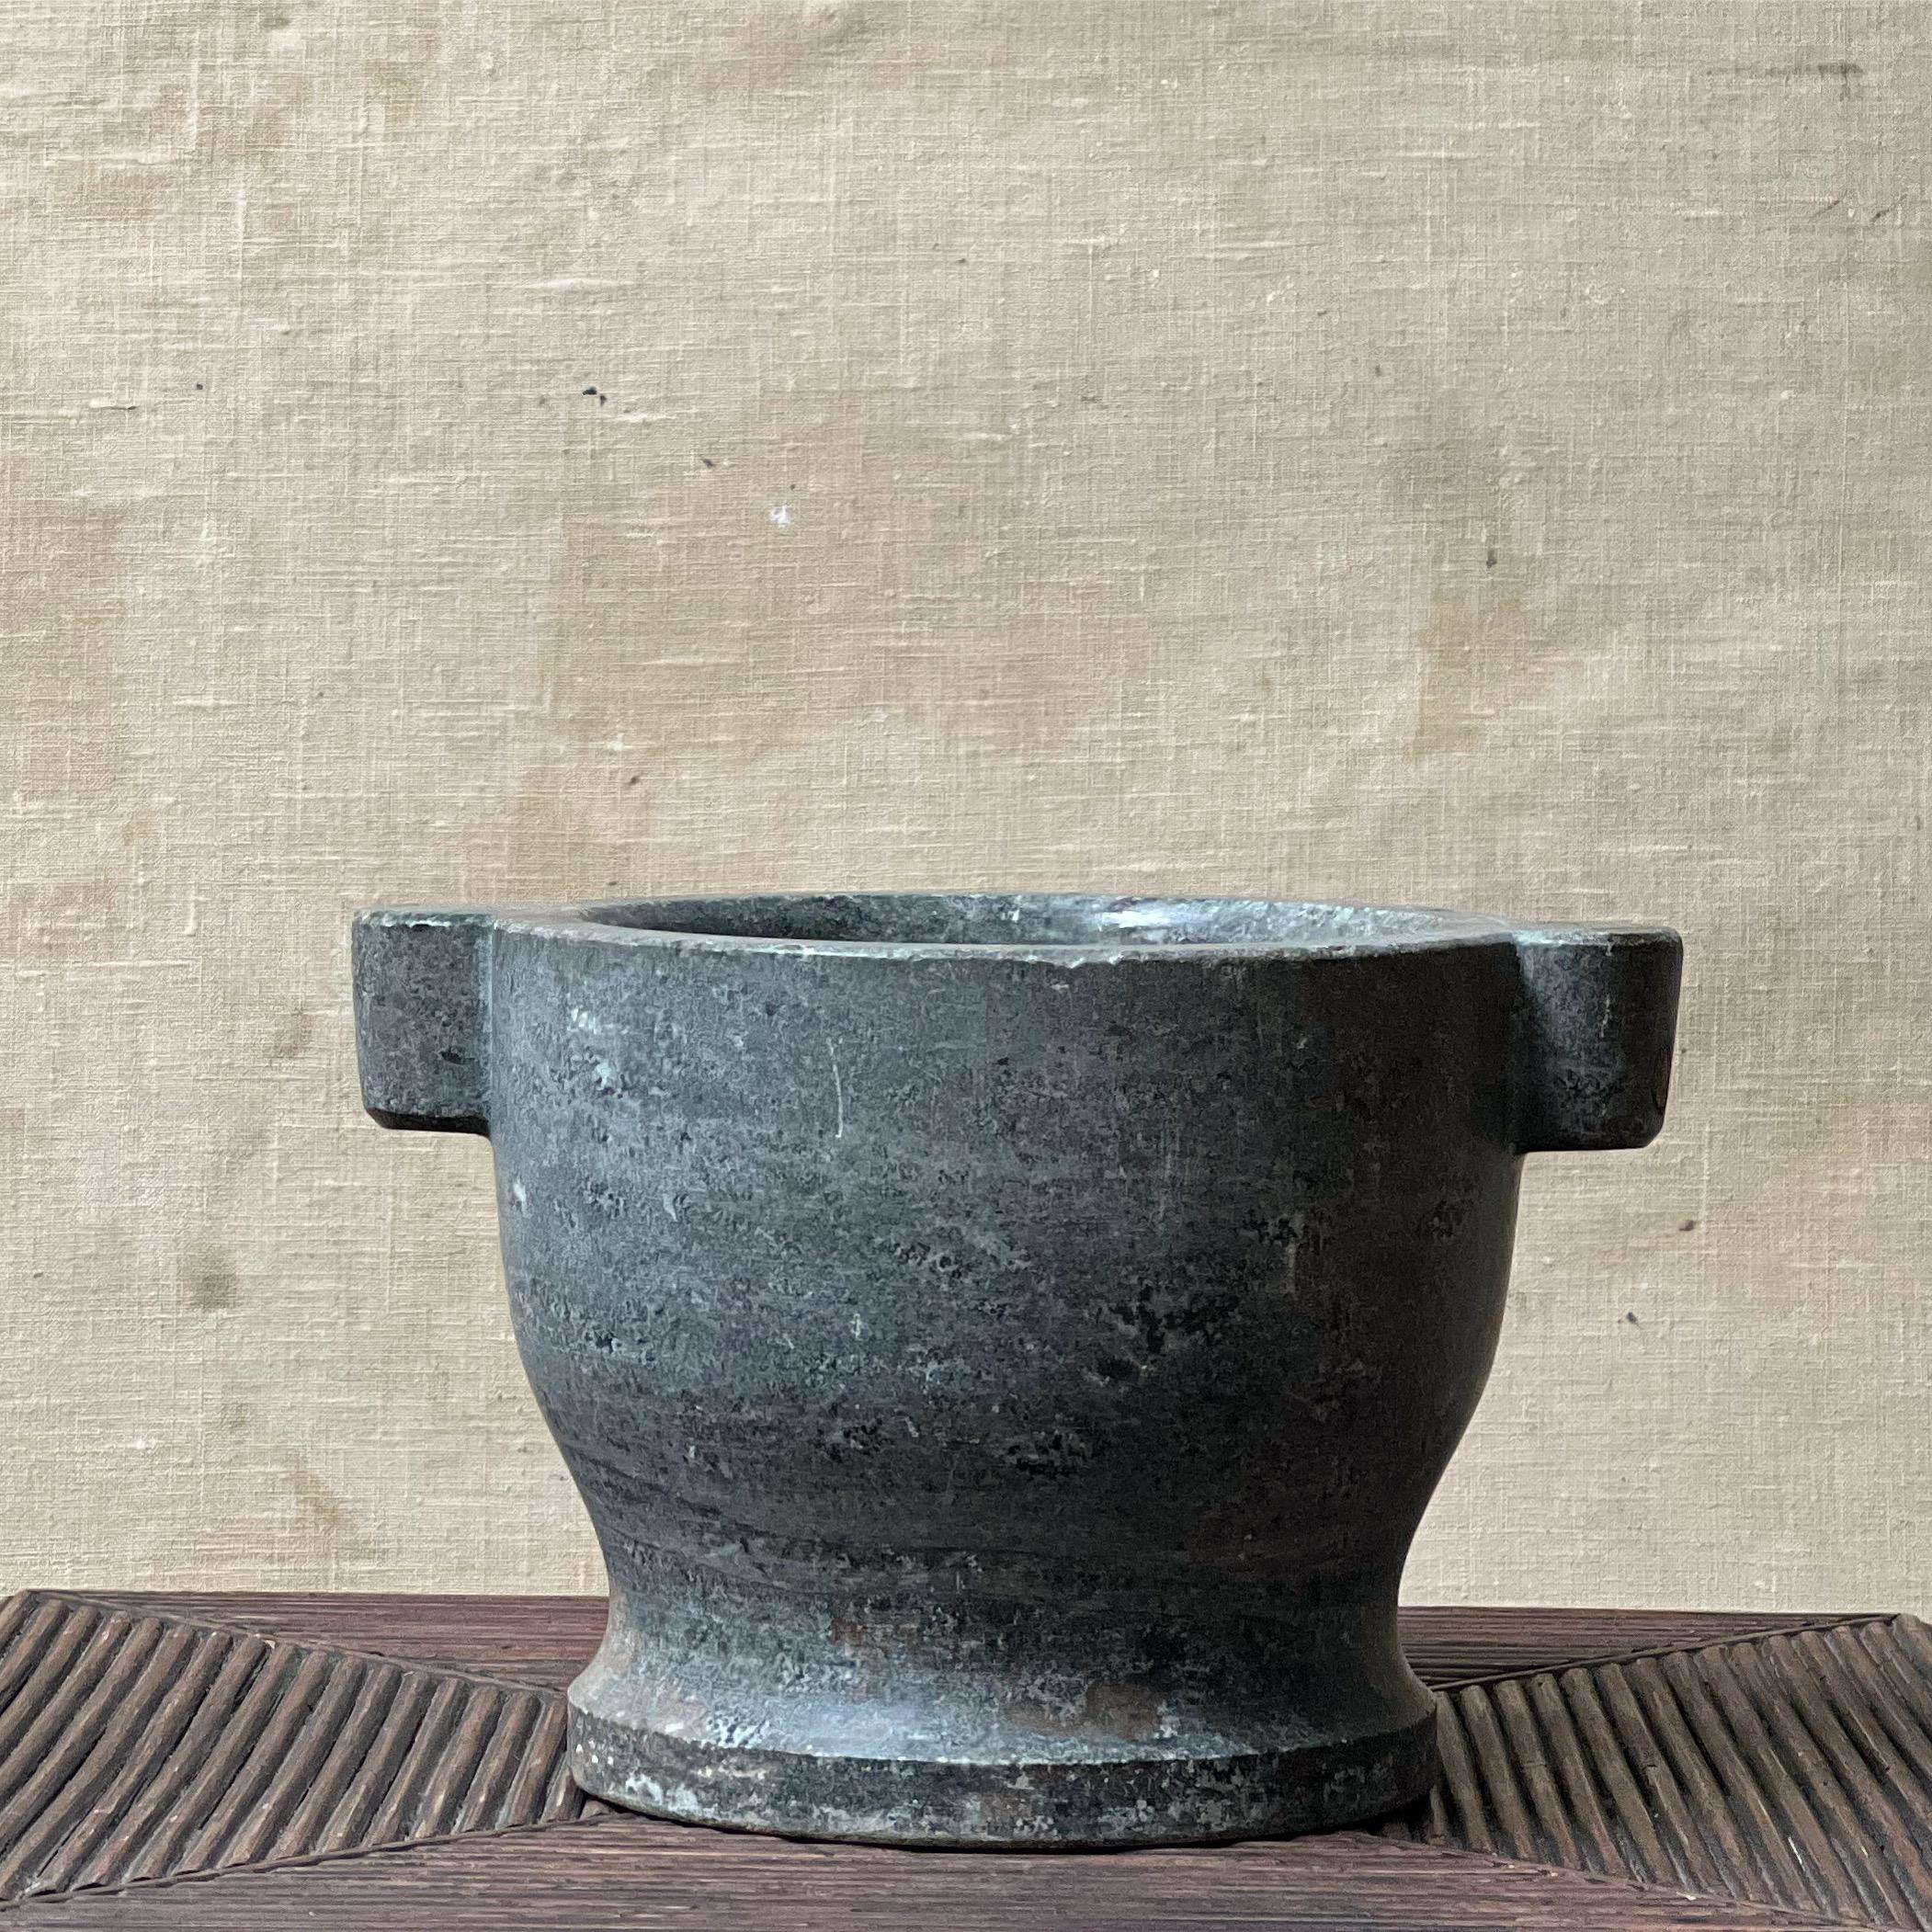 This mortar was found in sweden. It was handcrafted around 1900. It was definitely used as you can see some traces. Made of dark green / grey marble. Perfect as mortar, planter or decorative object. Different shades of green and grey with a